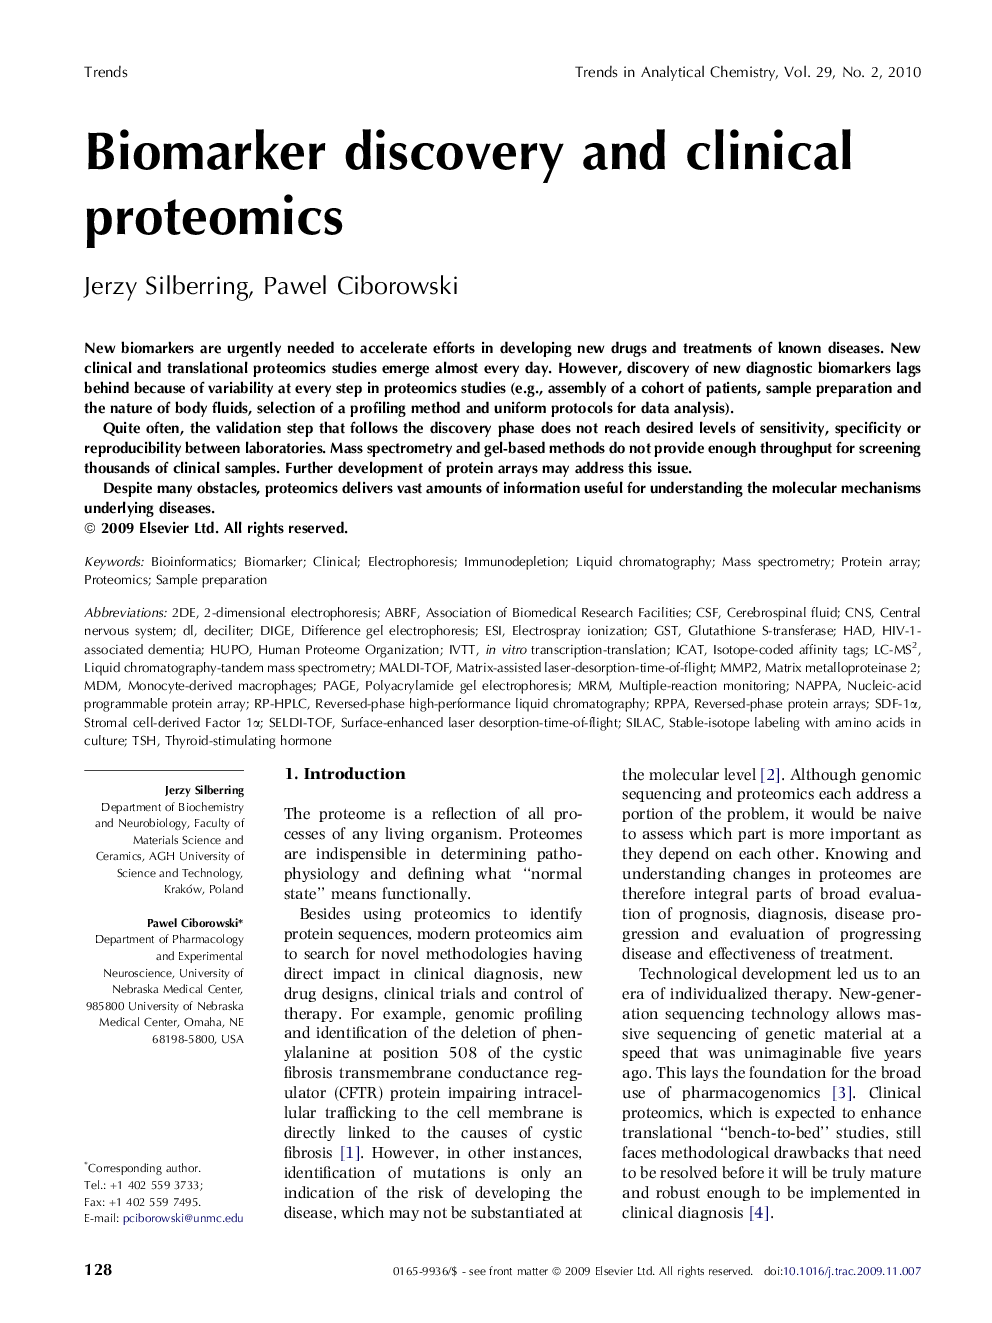 Biomarker discovery and clinical proteomics